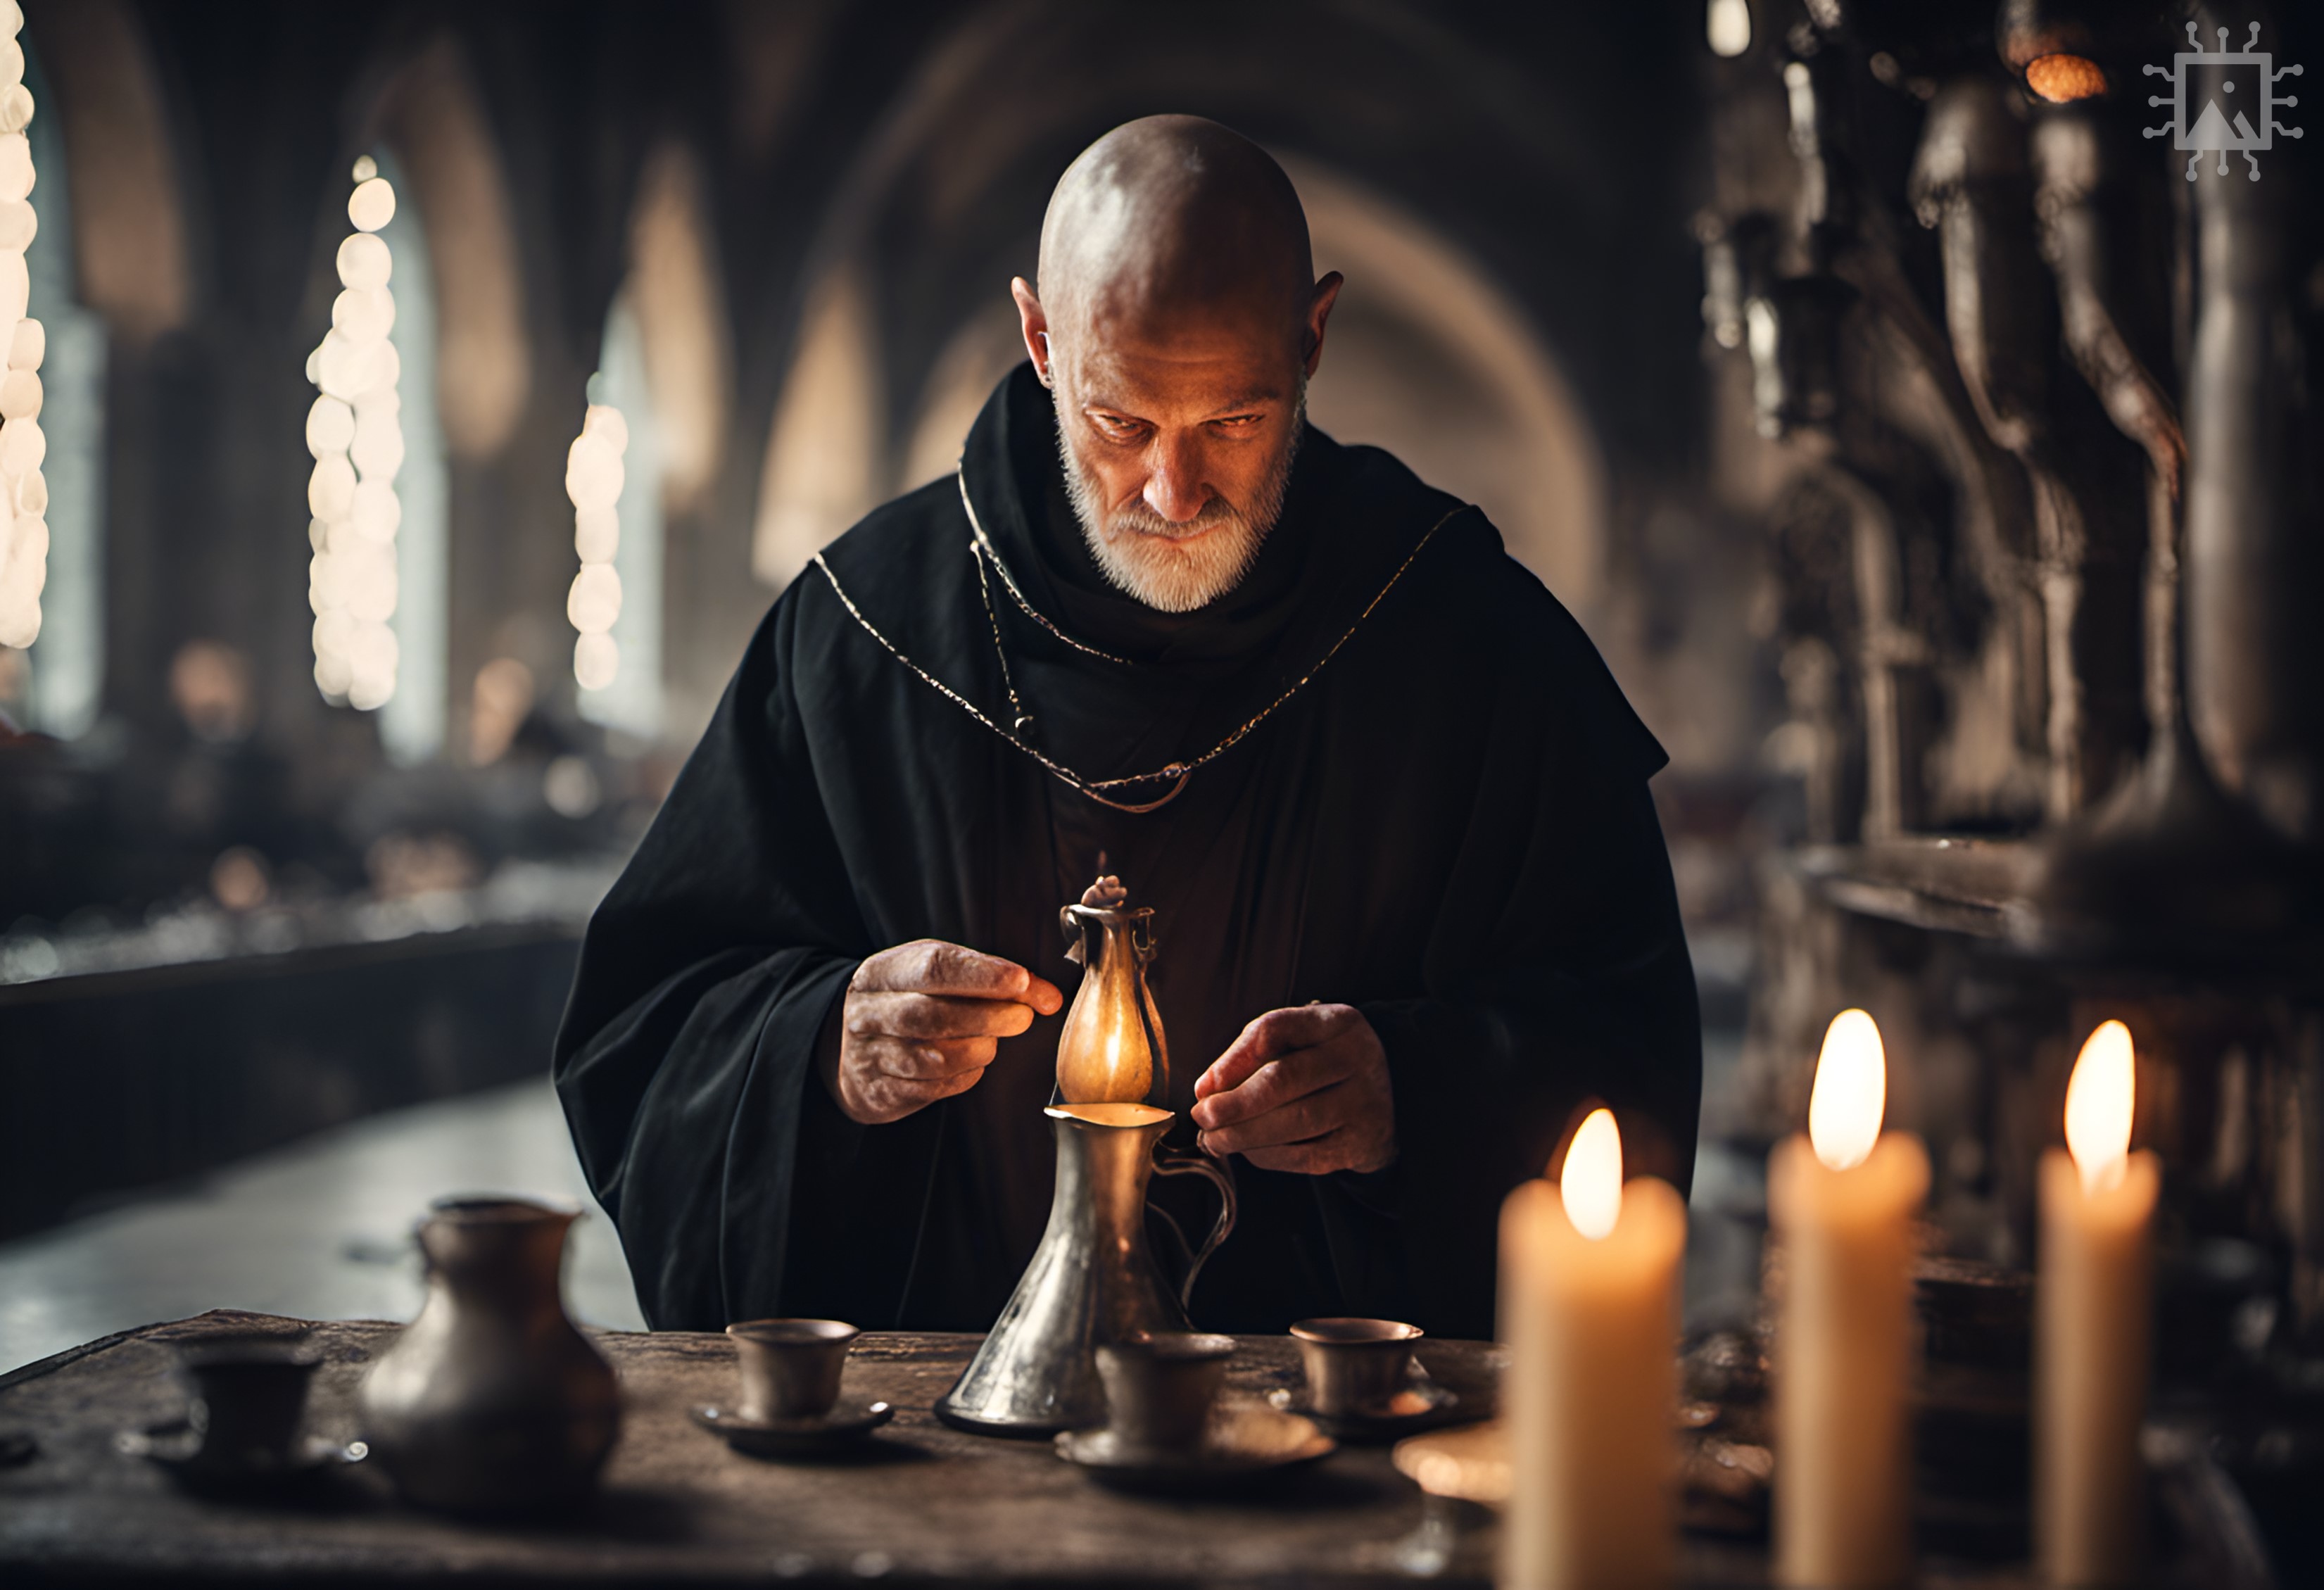 Artificial Intelligence-generated image produced using DreamStudio [accessed 20-09-2023]: ‘A clean-shaven middle aged medieval Benedictine monk in a black robe counting silver cups in a sacristy with candles and ceramic jugs of wine.’ Find out more: rochestercathedral.org/research/ai